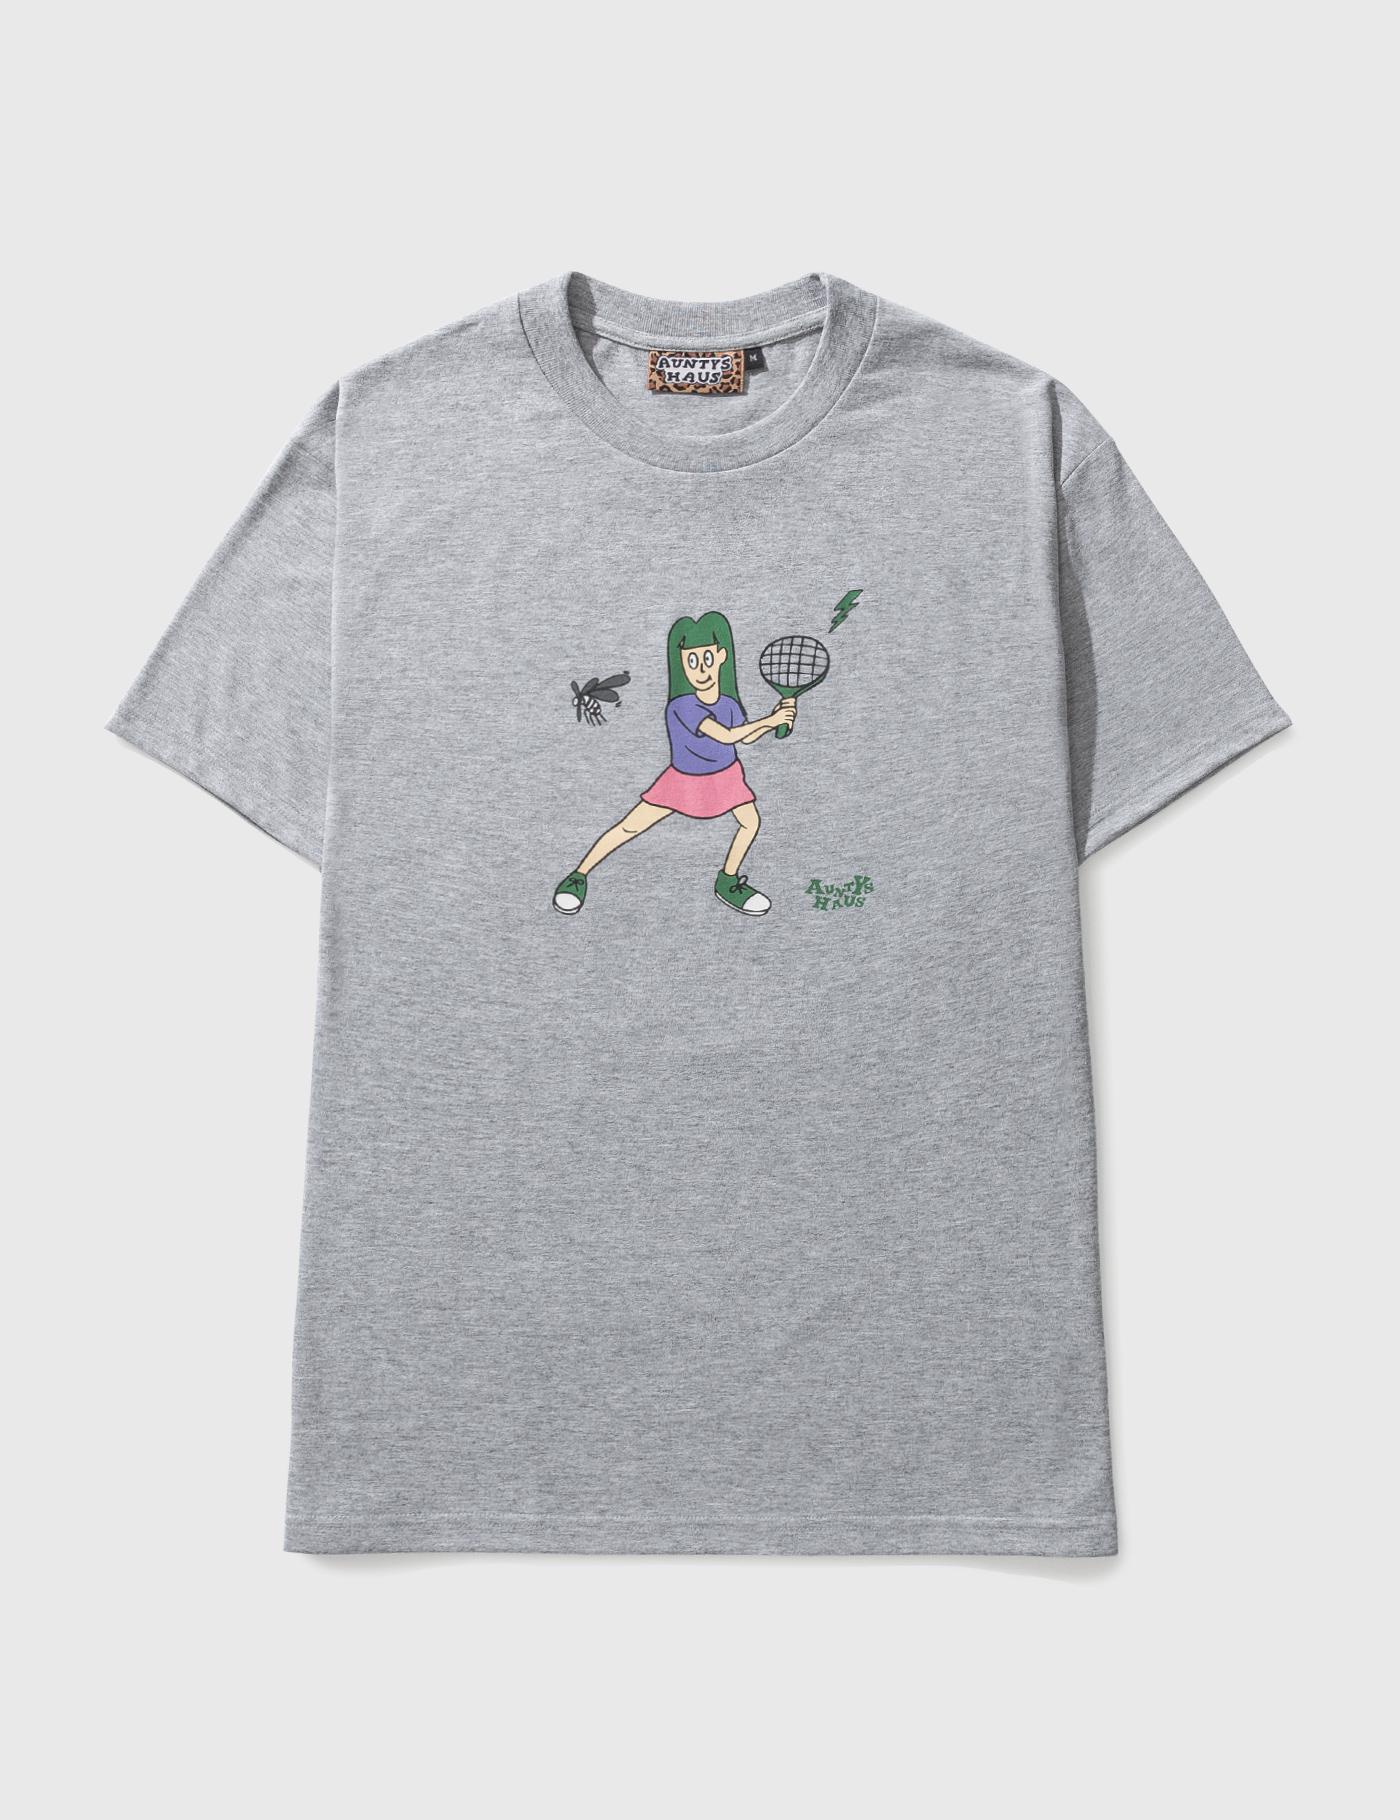 Deadly Tennis T-shirt by AUNTYS HAUS